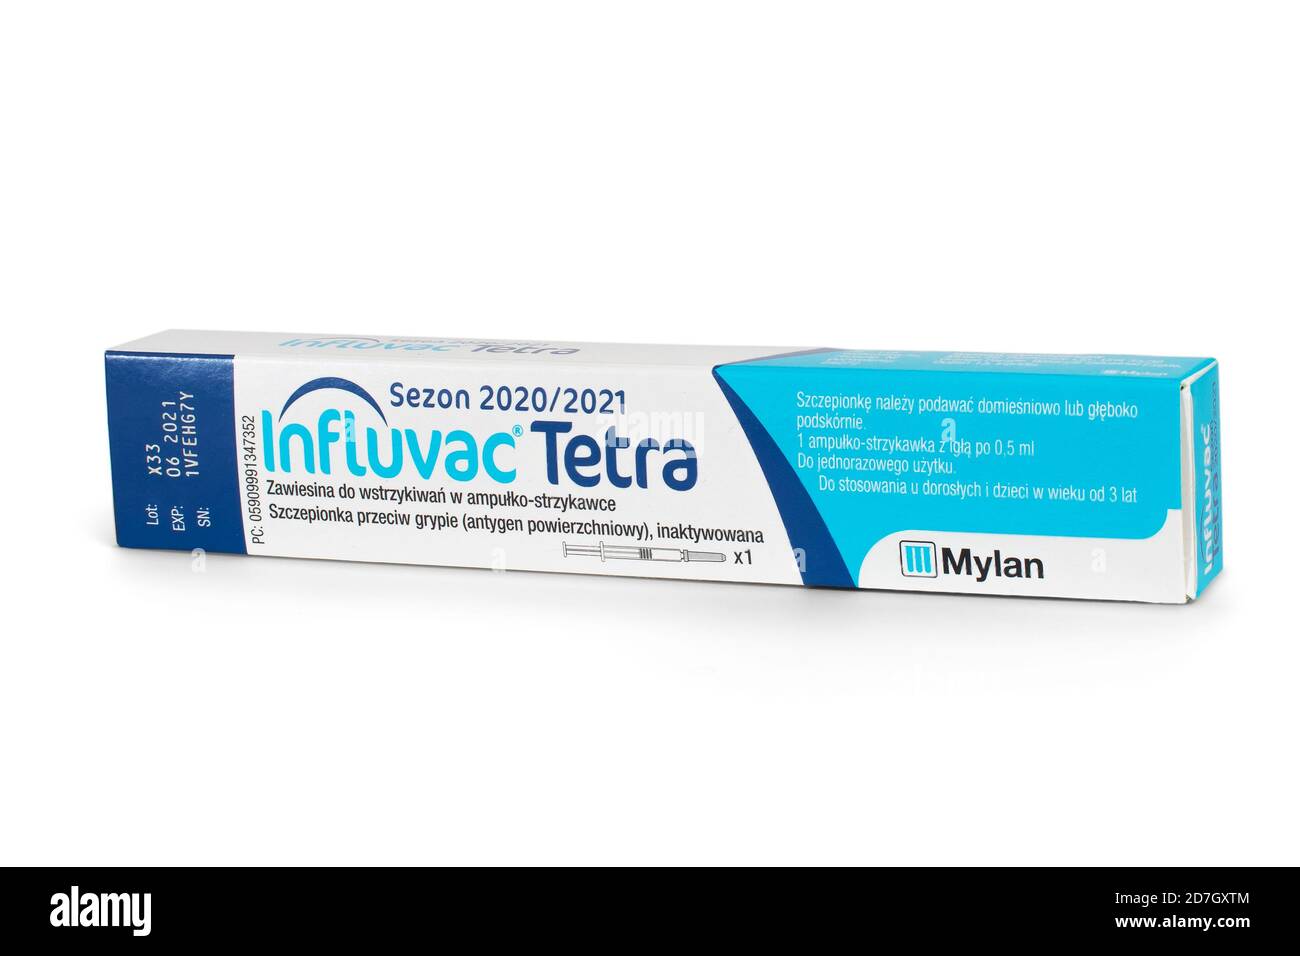 KRAKOW, POLAND - October 16, 2020. Influenza vaccine (trade name INFLUVAC Tetra) used in the prevention of influenza in Poland in the 2020/2021 season Stock Photo